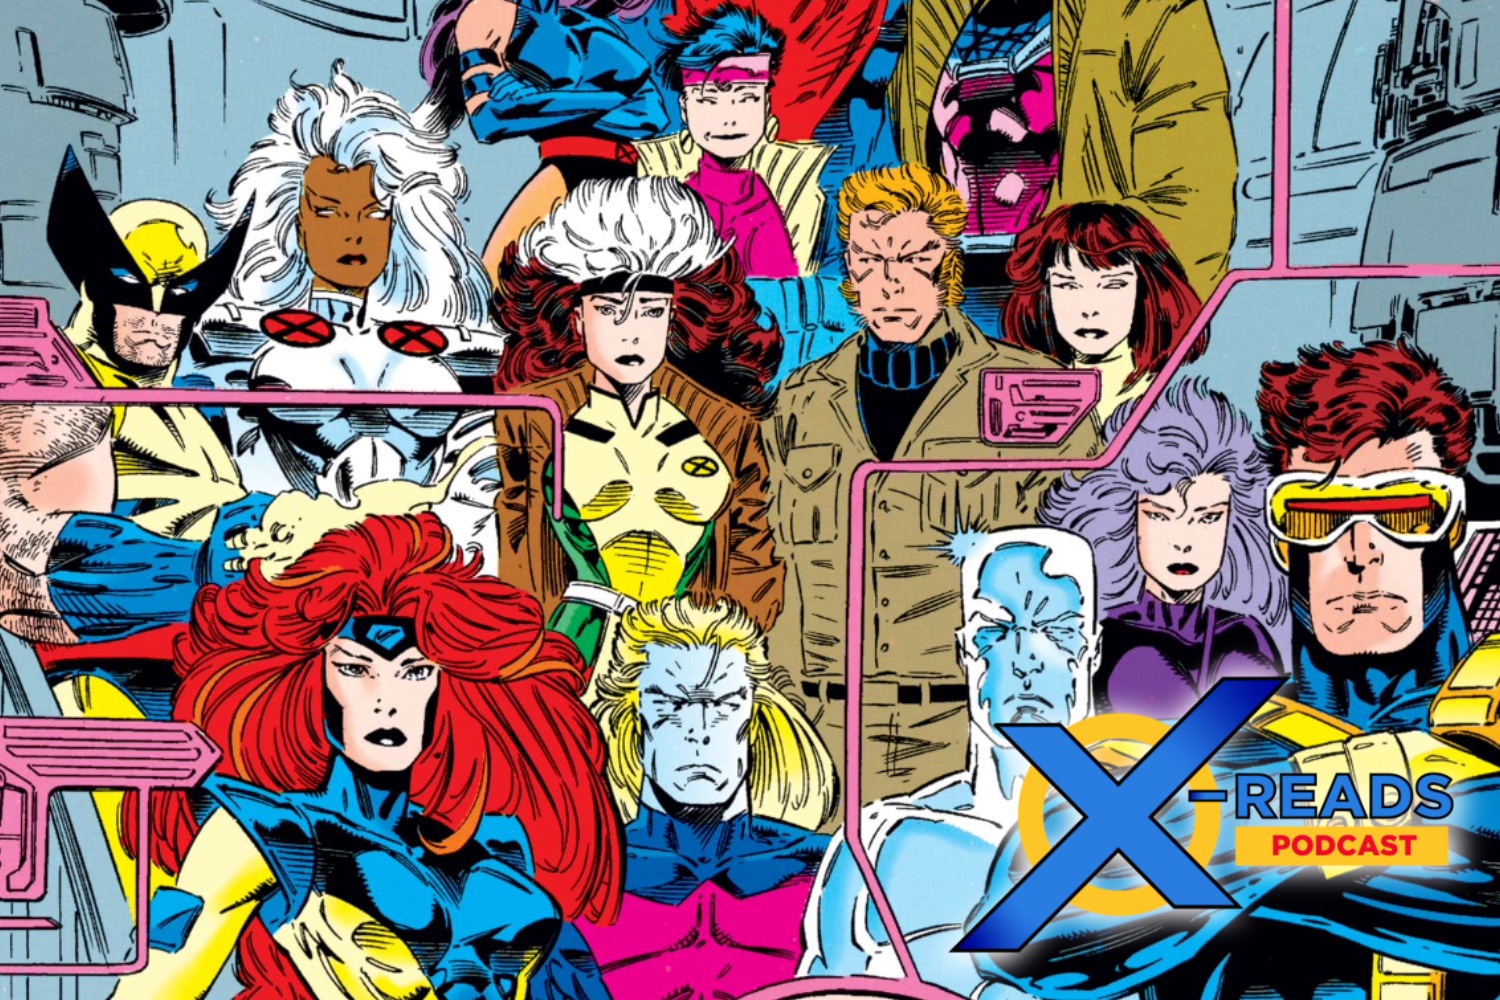 X-Reads Podcast Episode 88: 'X-Men' #25: Fatal Attractions with Fabian Nicieza